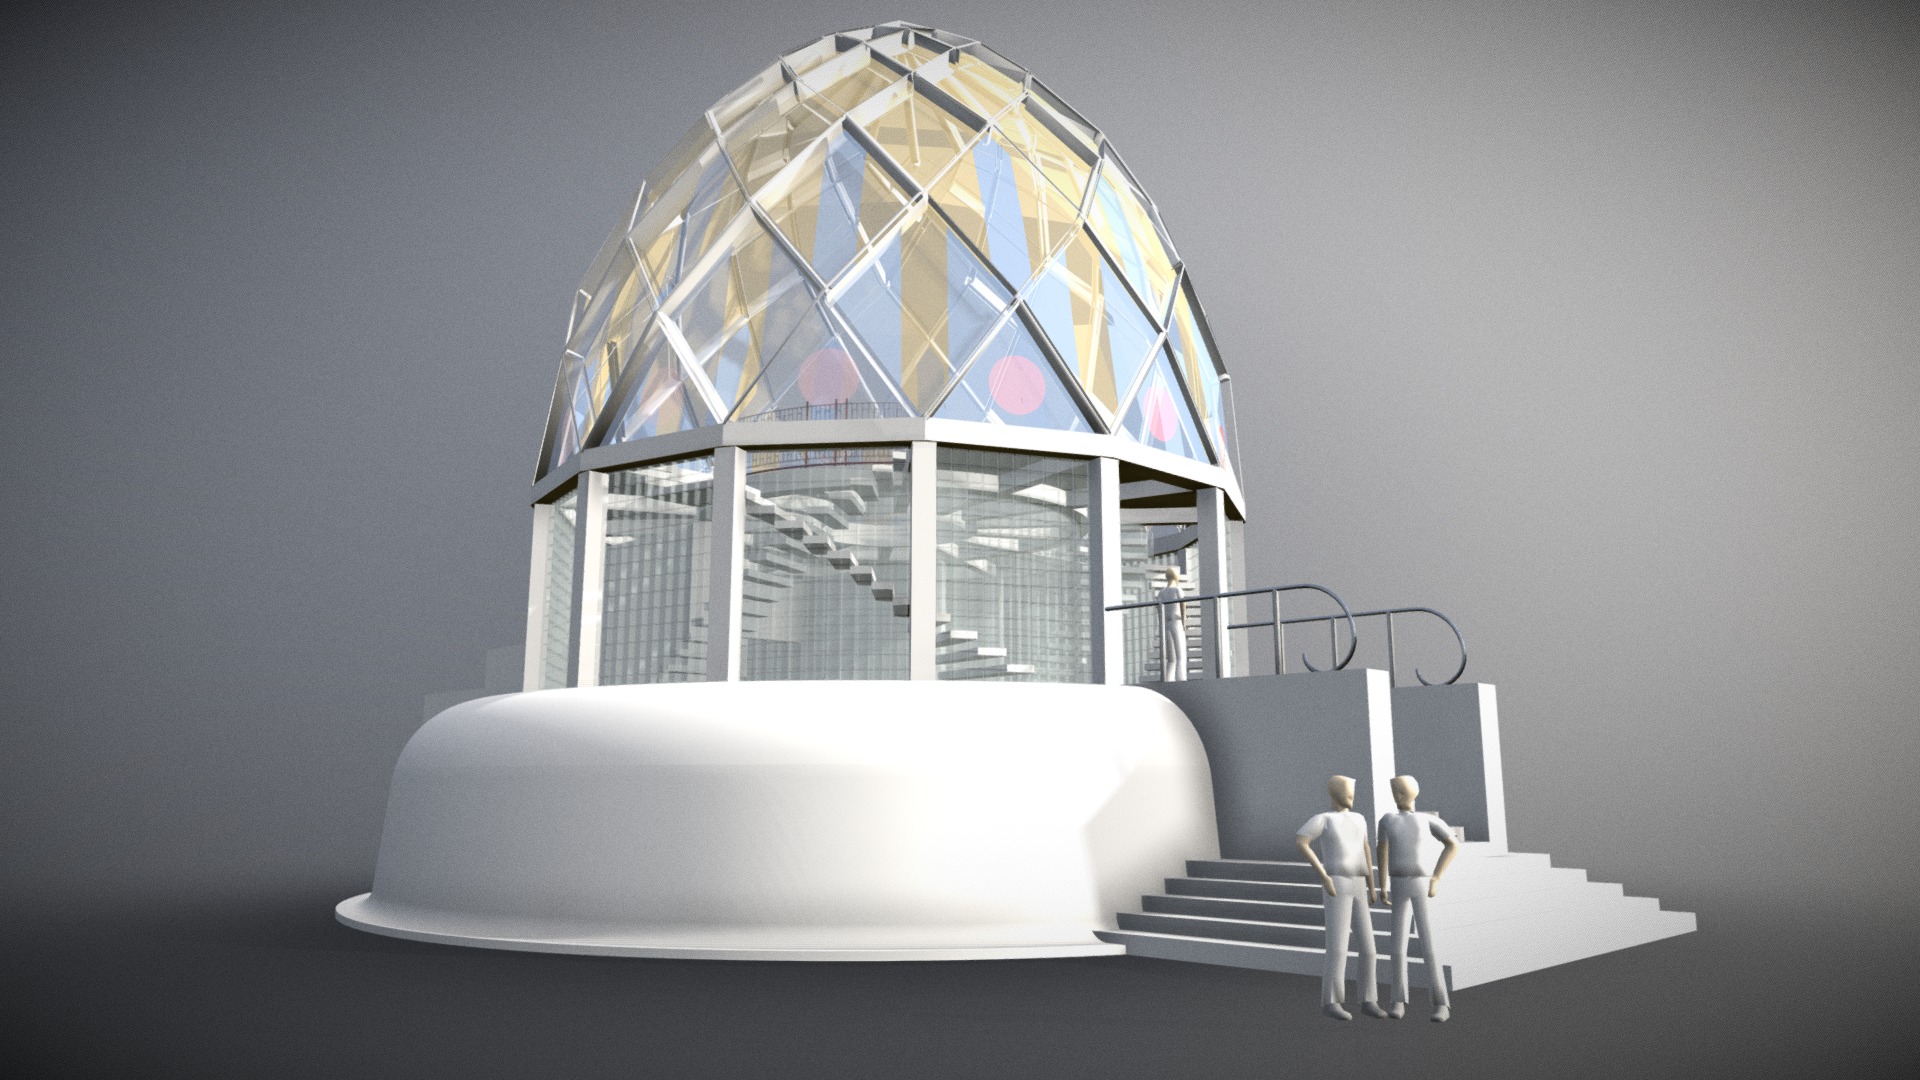 3D model Bruno Taut’s Glass Pavilion - This is a 3D model of the Bruno Taut's Glass Pavilion. The 3D model is about a couple of people looking at a large white object with a glass dome.